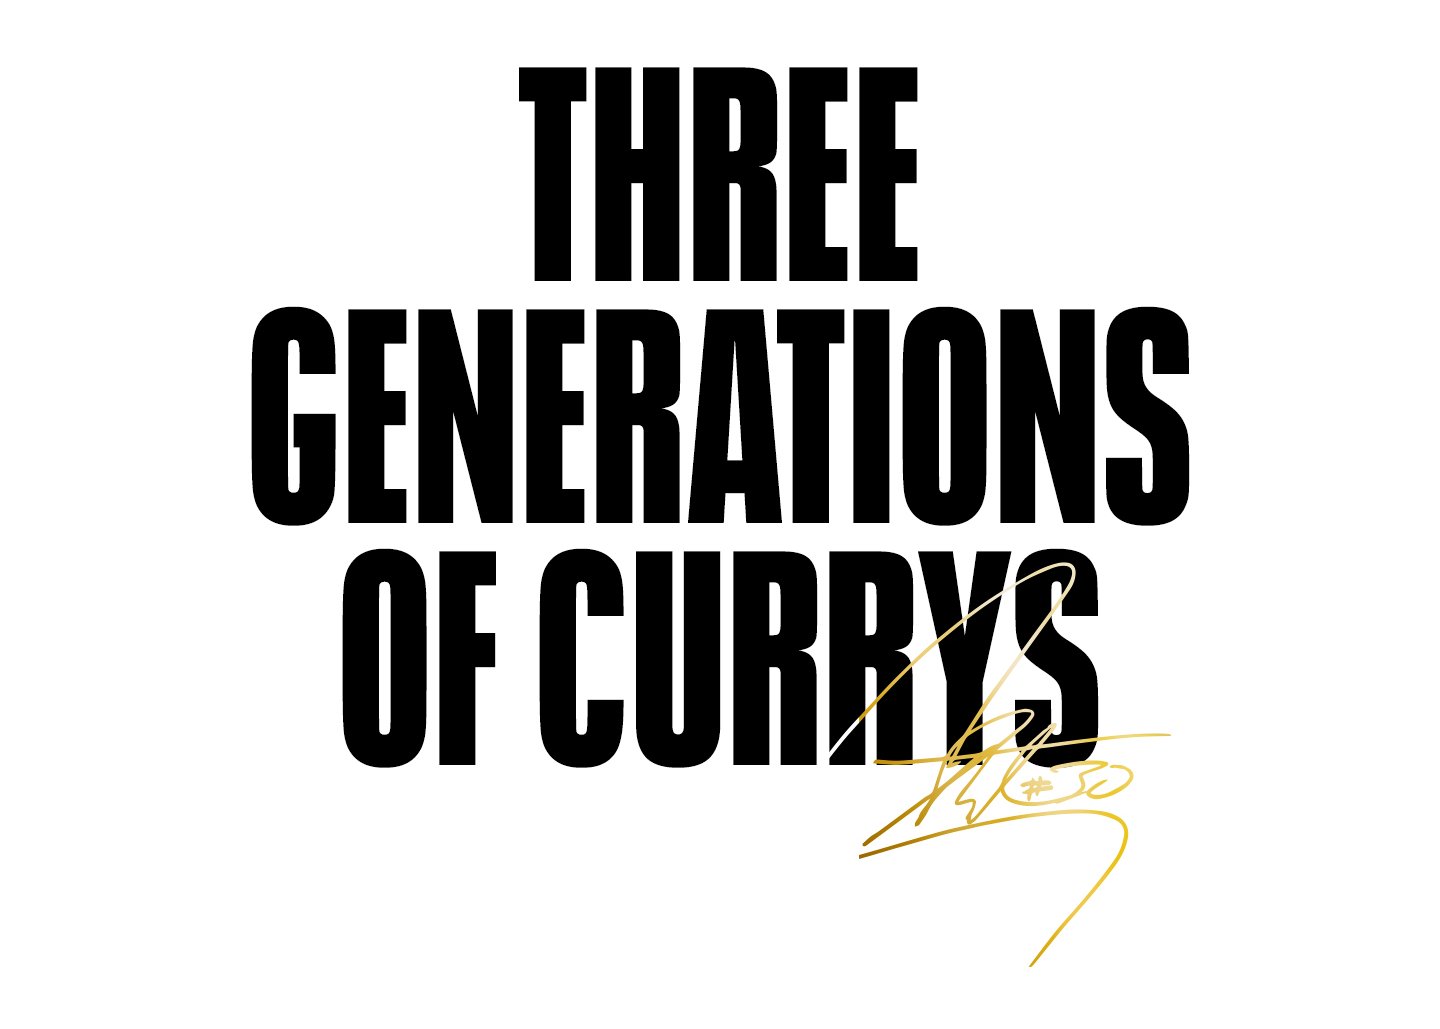 SS23_CURRY_CurryFlow10_FatherToSon_Site_7_5